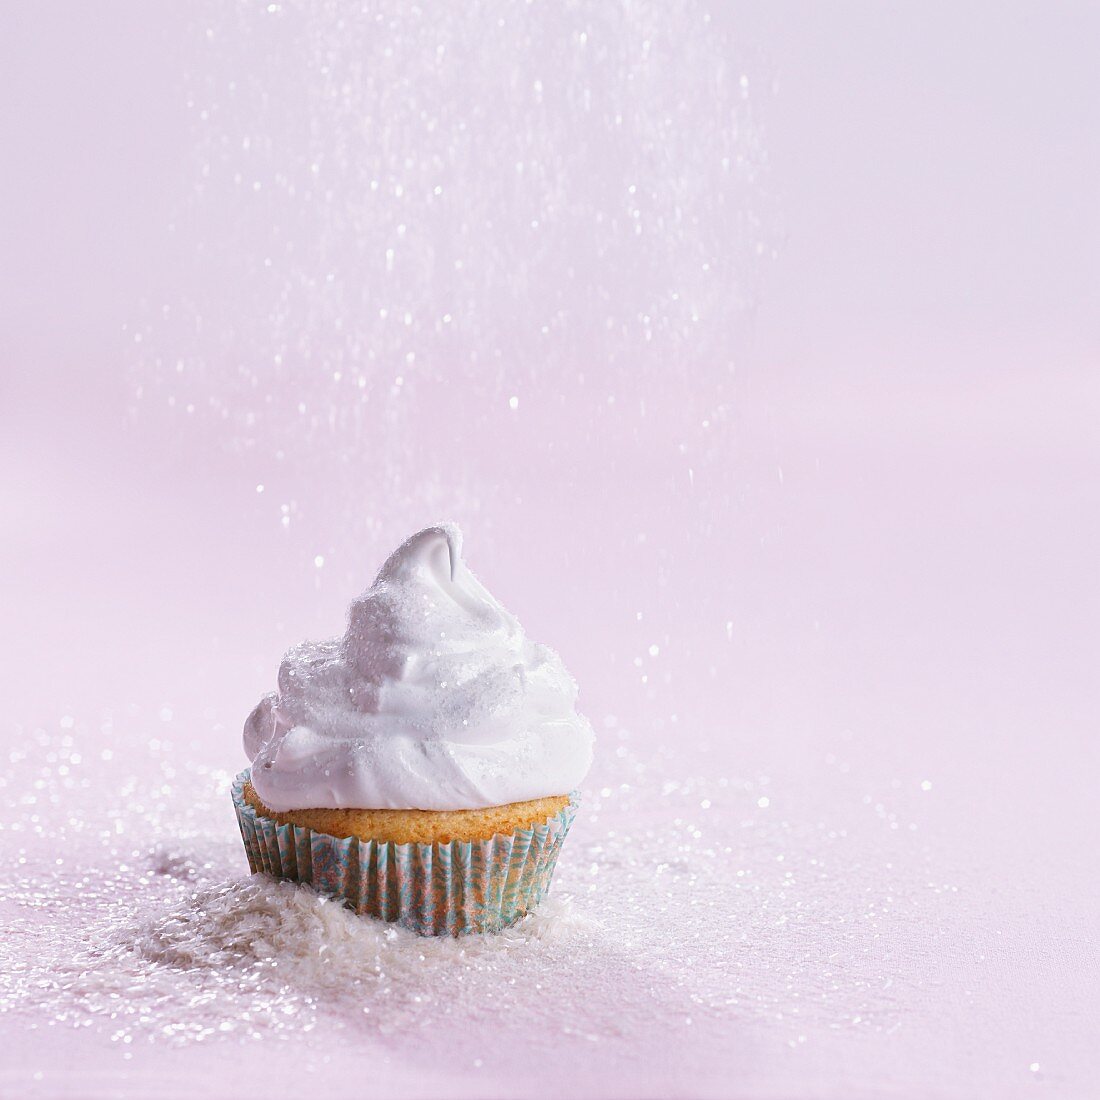 A cupcake sprinkled with grated coconut